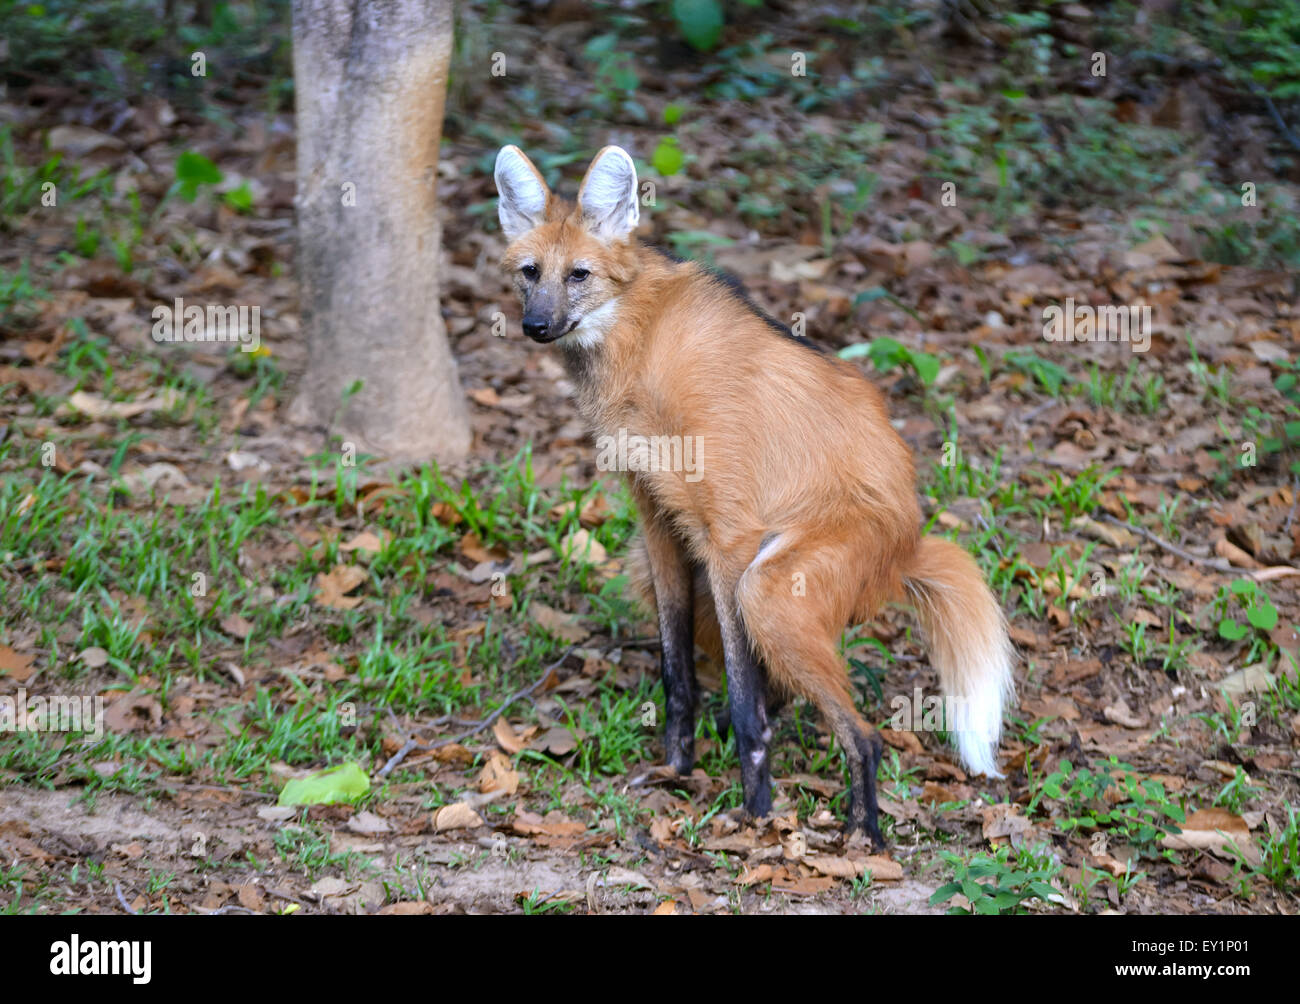 maned wolf in natuer Stock Photo